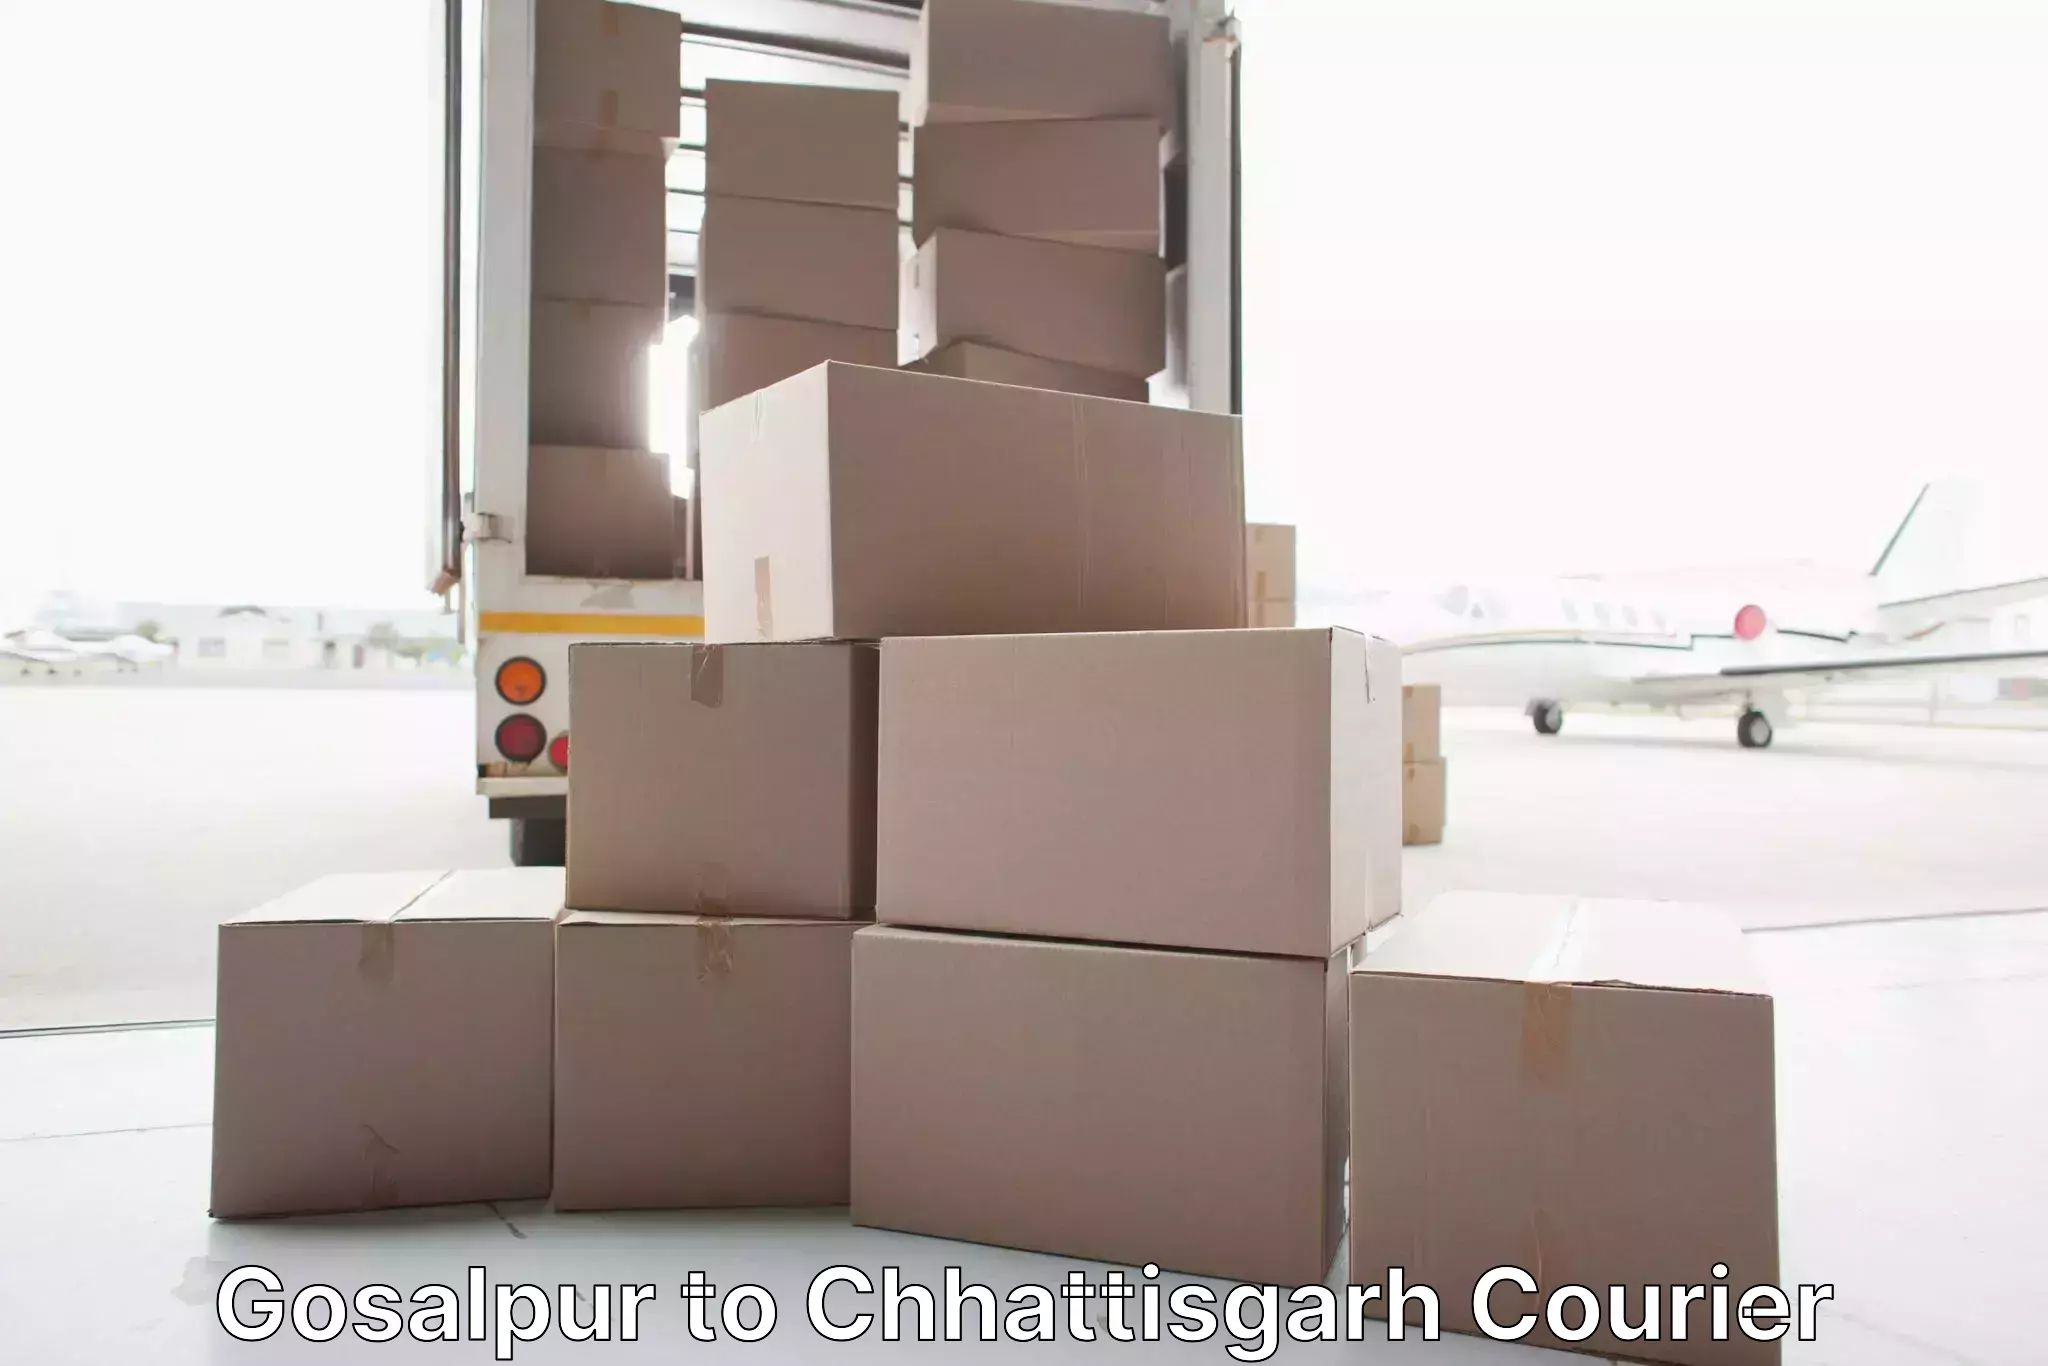 Professional movers and packers Gosalpur to Jaijaipur